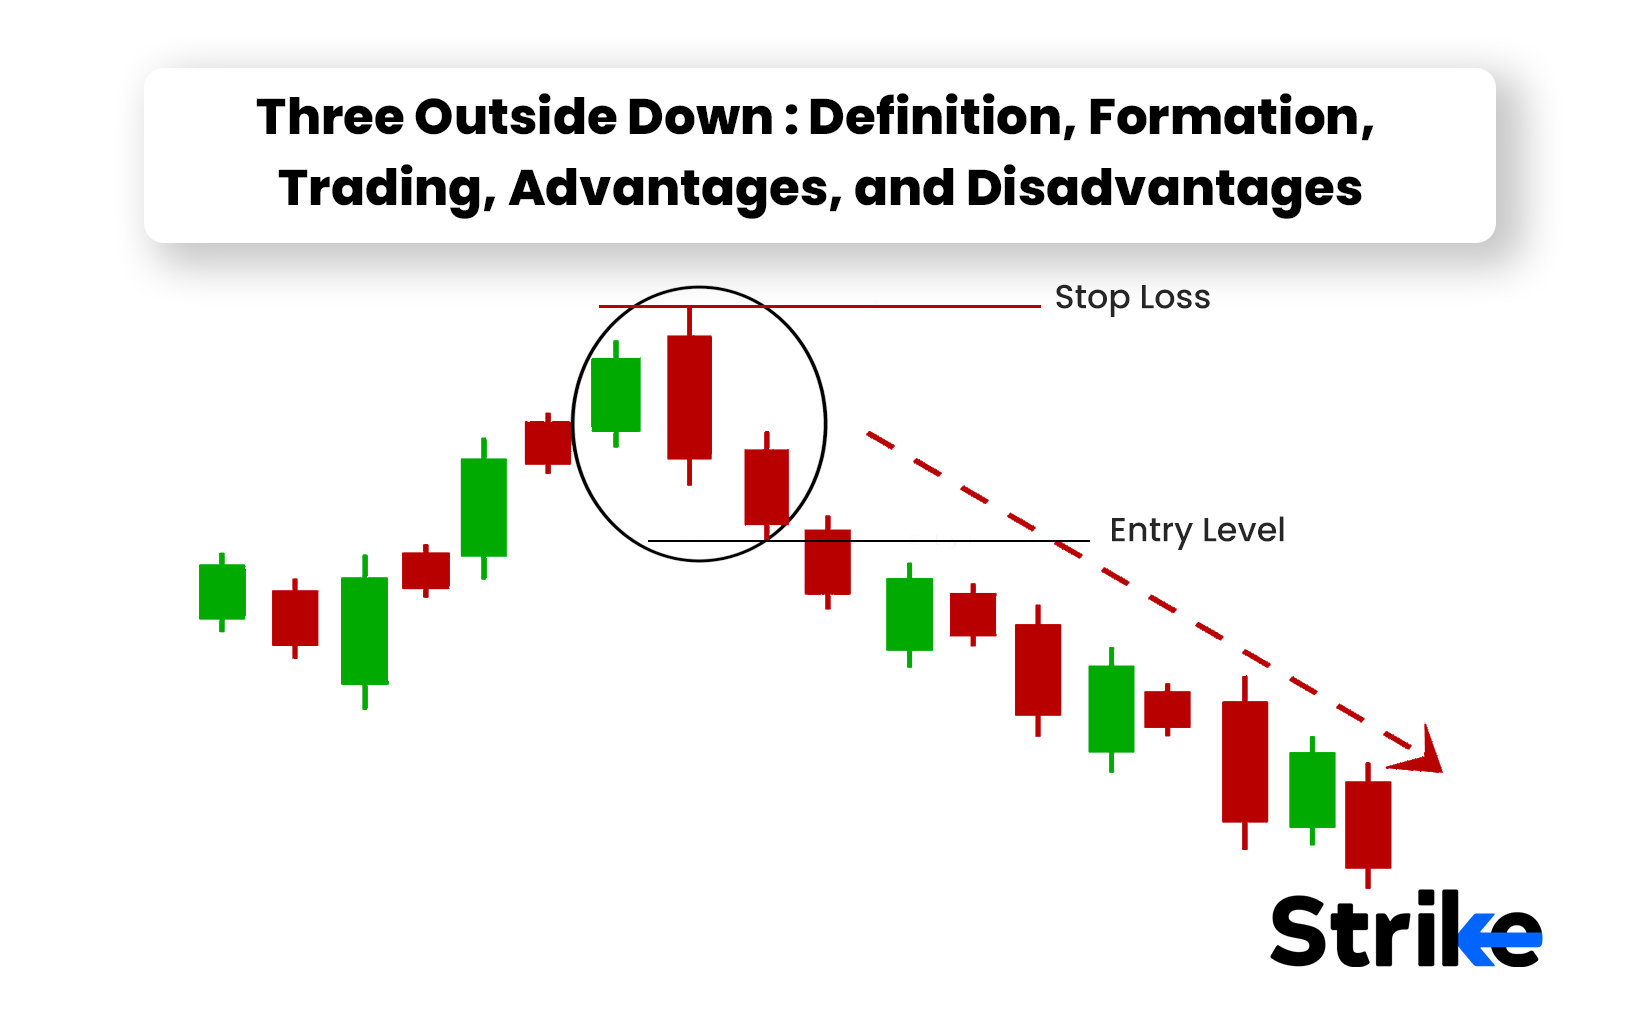 Three Outside Down: Definition, Formation, Trading, Advantages and Disadvantages